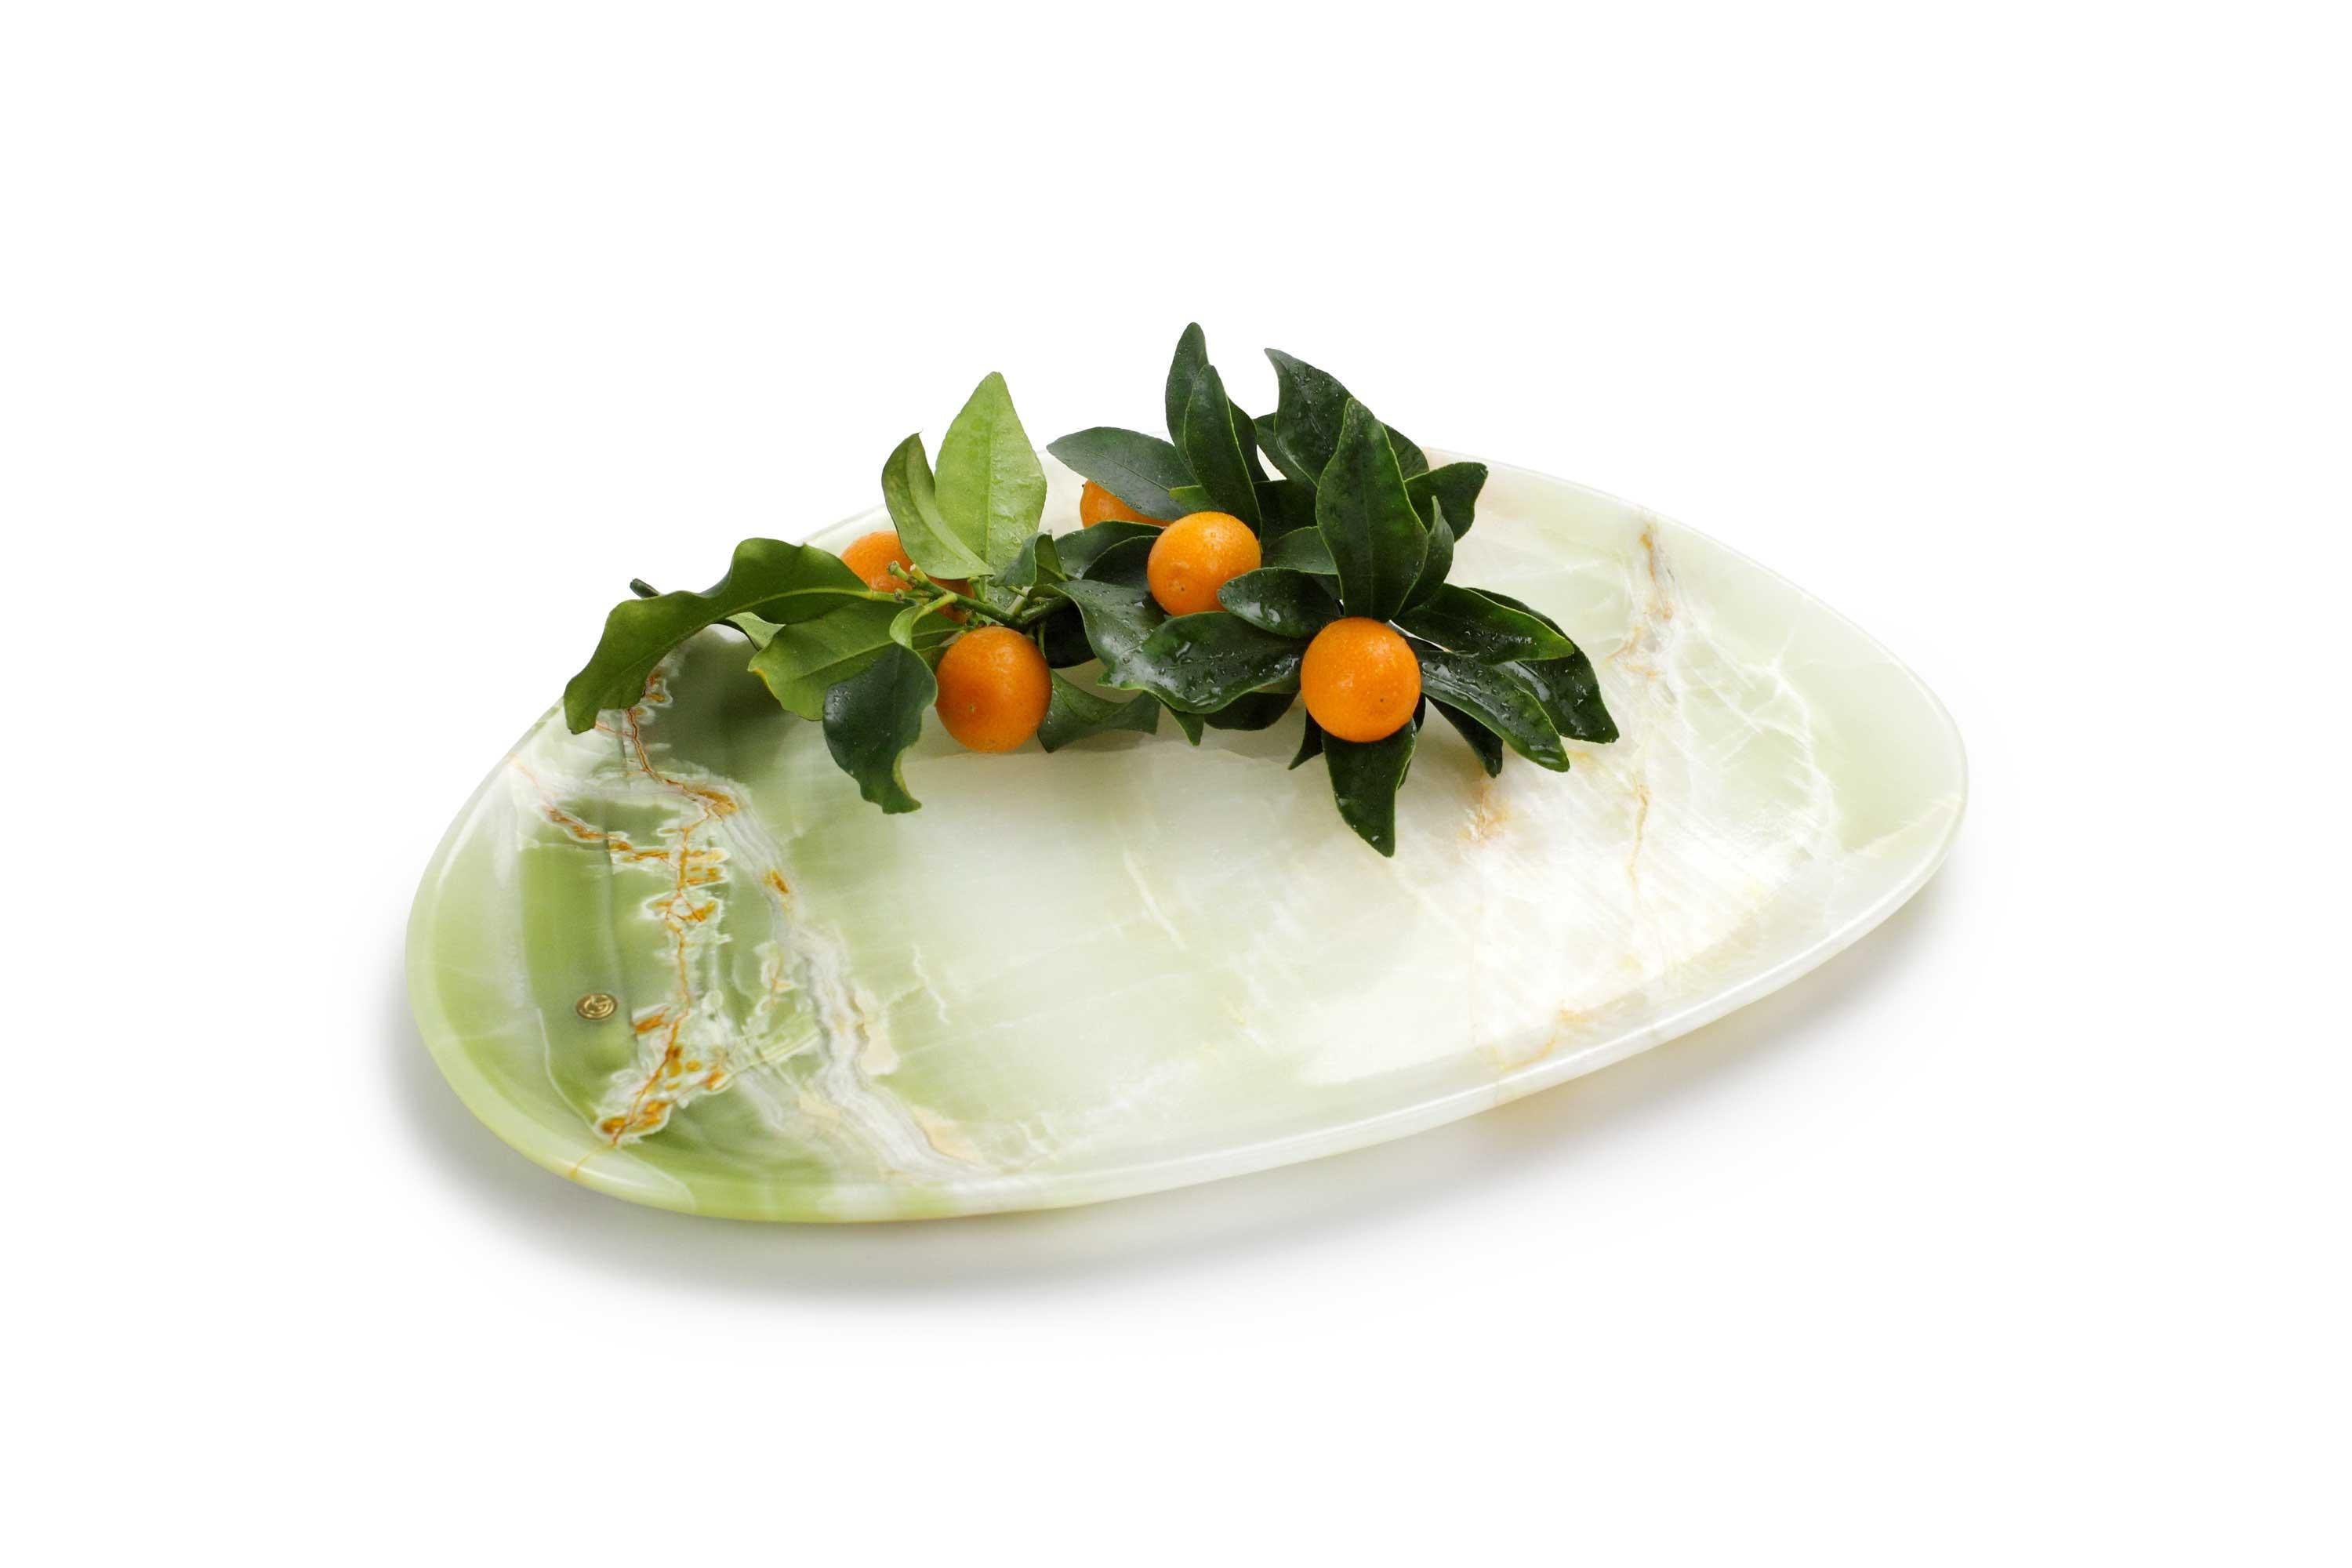 Hand carved presentation plate from green onyx. Multiple use as plates, platters and placers. The polished finishing underlines the transparency of the onyx making this a very precious object. 

Dimensions: Medium L 30, W 28, H 1.8 cm, also